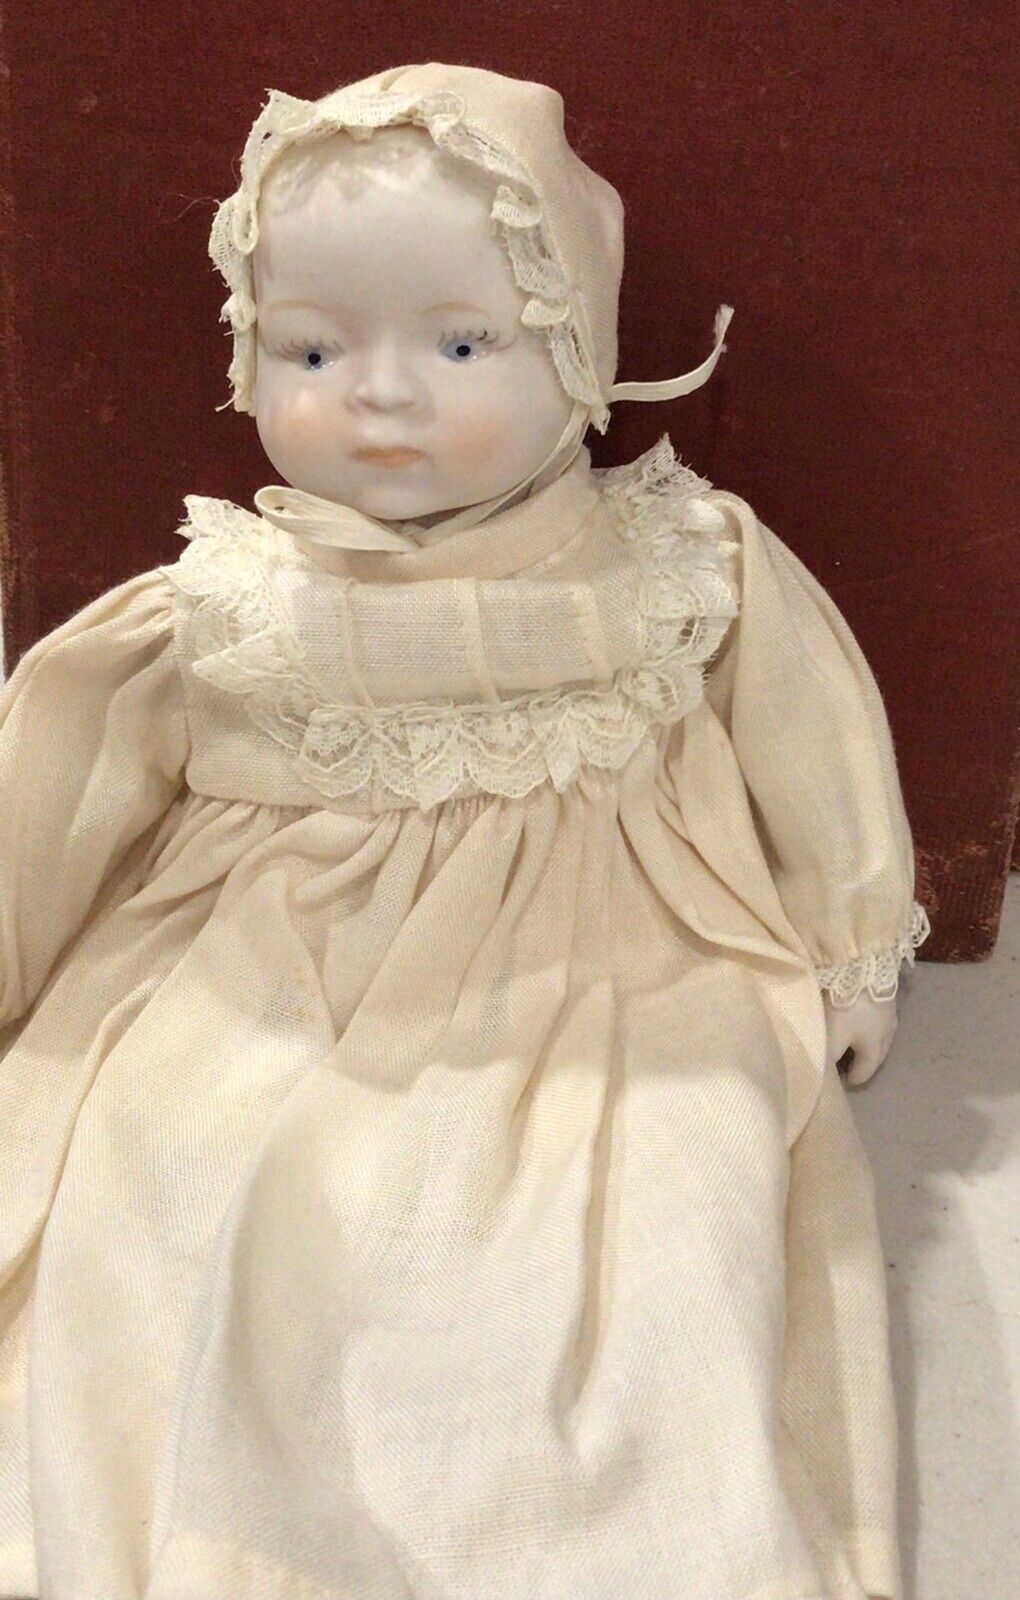 Vintage 9” Bisque Baby Doll - Bisque - Japan - Cloth Body - Christening Gown